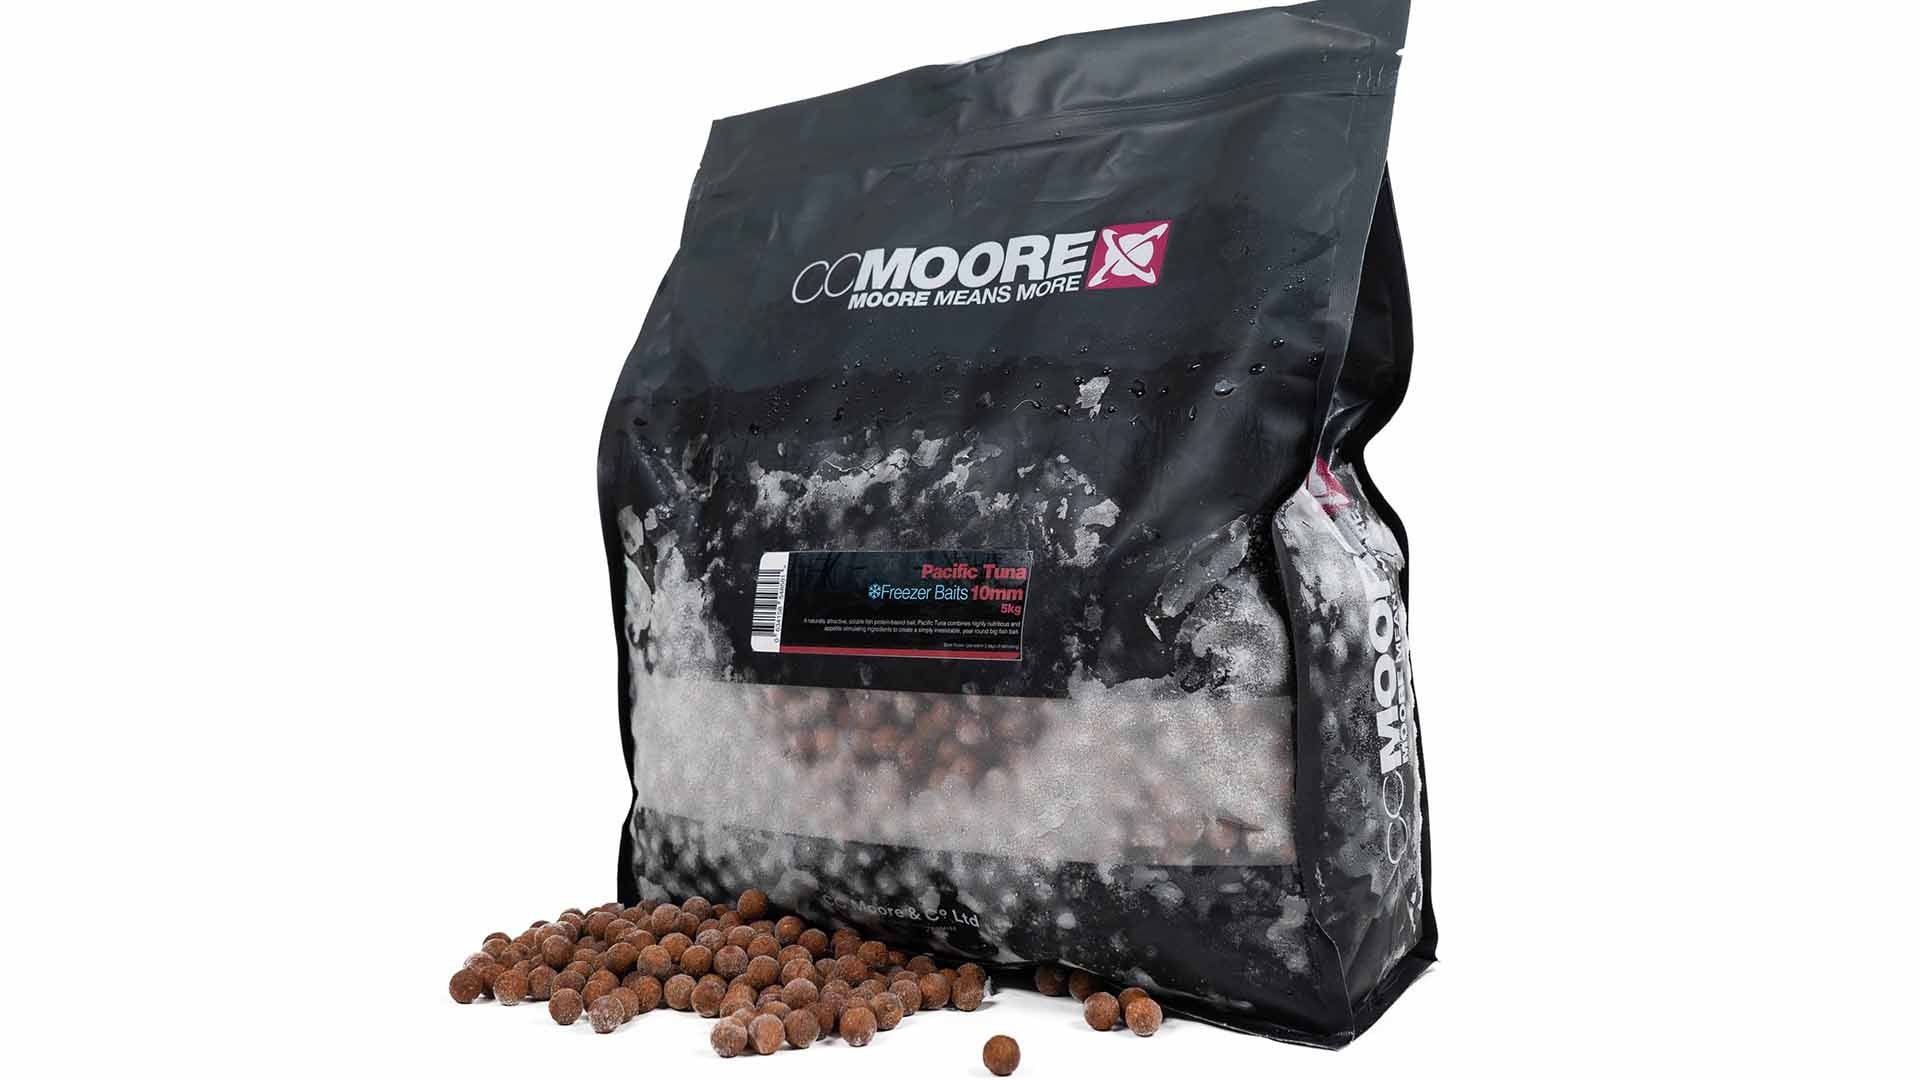 CC MOORE CC MOORE Pacific Tuna Freezer Baits CC MOORE Pacific Tuna Freezer Baits 10mm 5kg - Parkfield Angling Centre